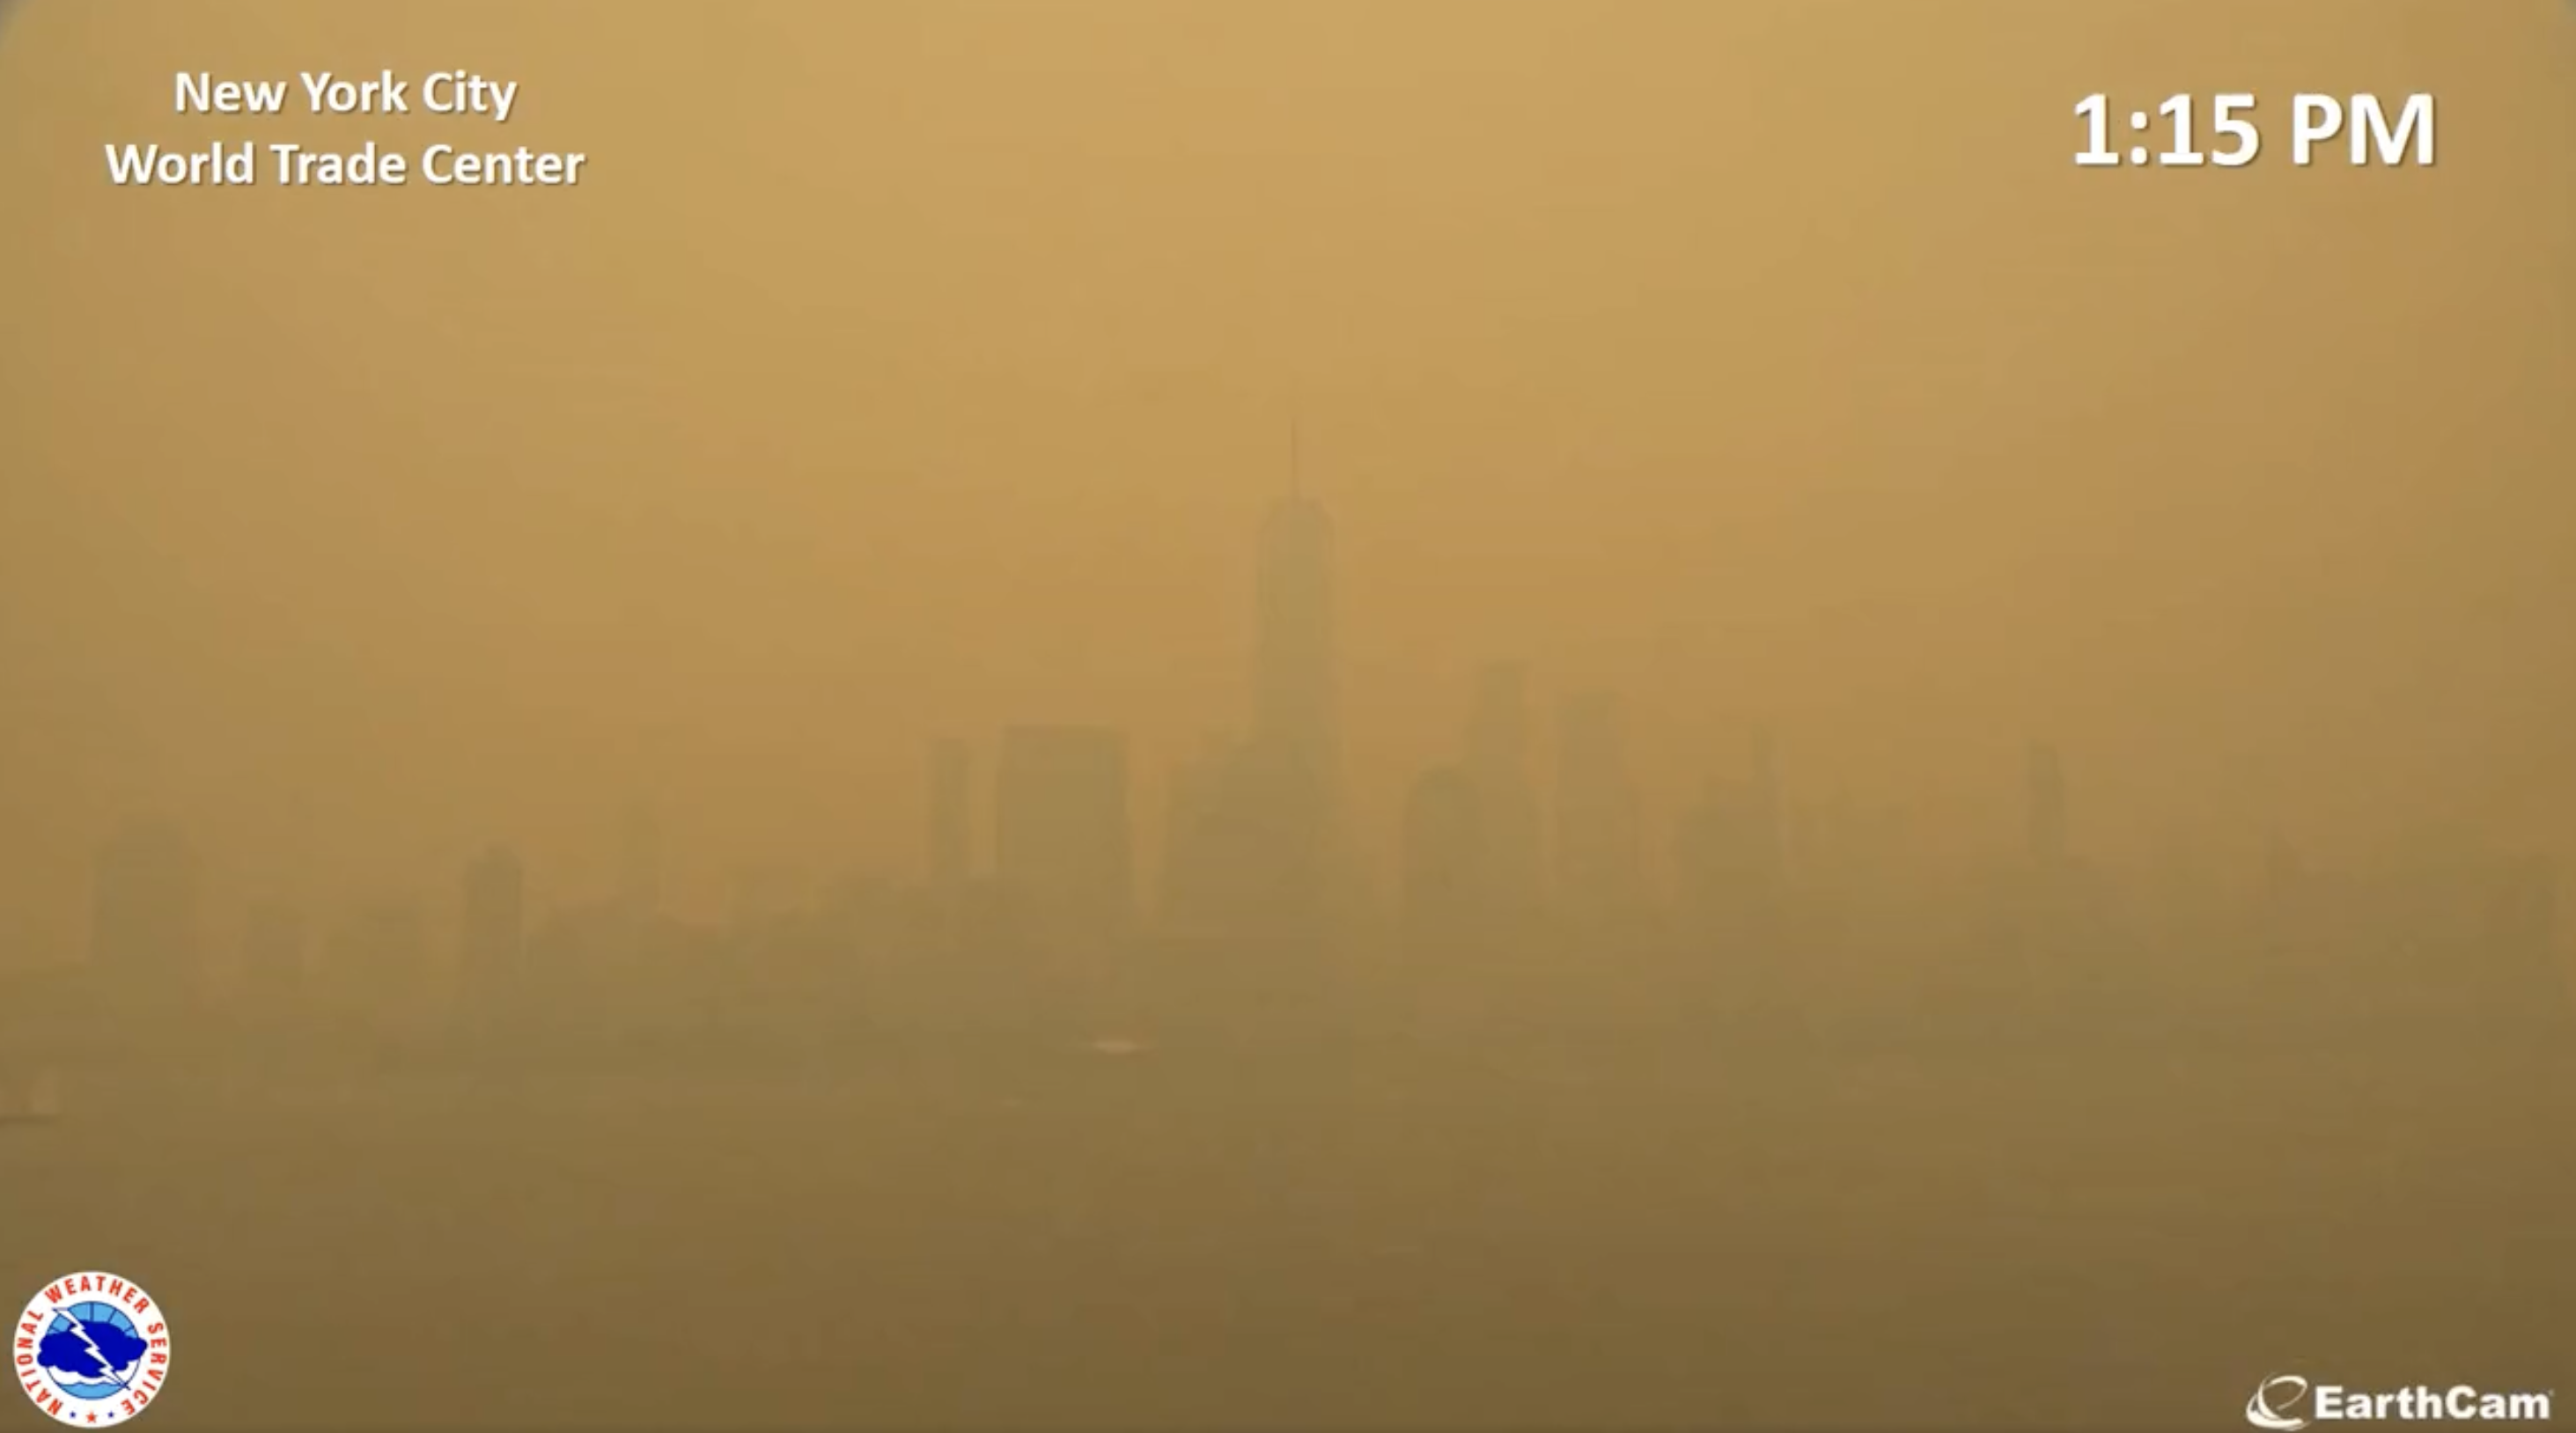 View of the downtown Manhattan skyline at 1:15 pm, with the skyline barely visible